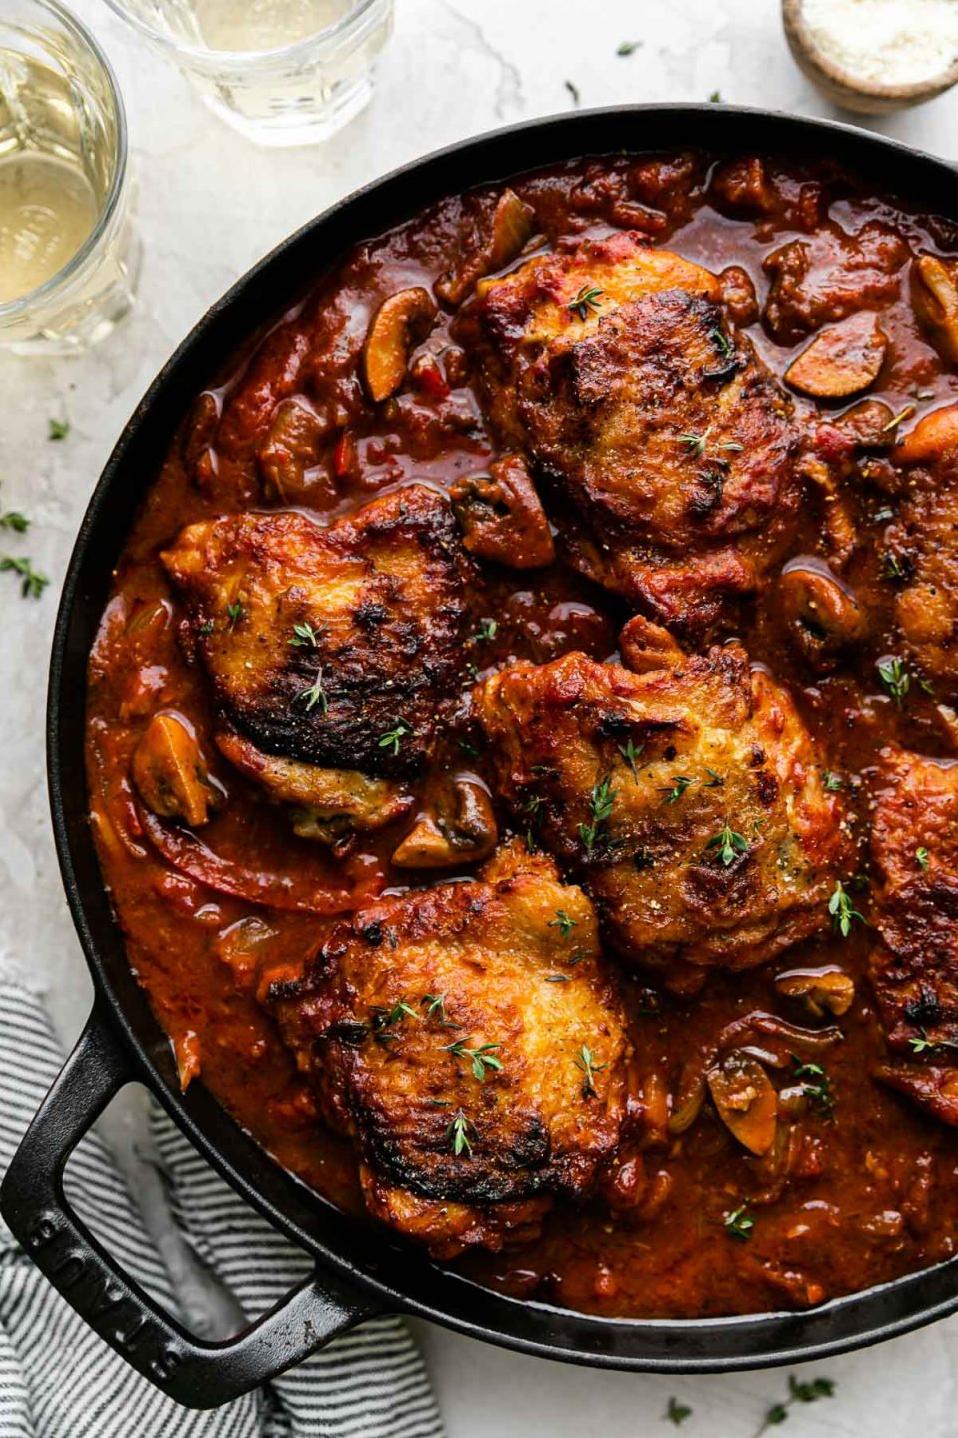  Sautéed chicken simmering in a rich and flavorful tomato sauce